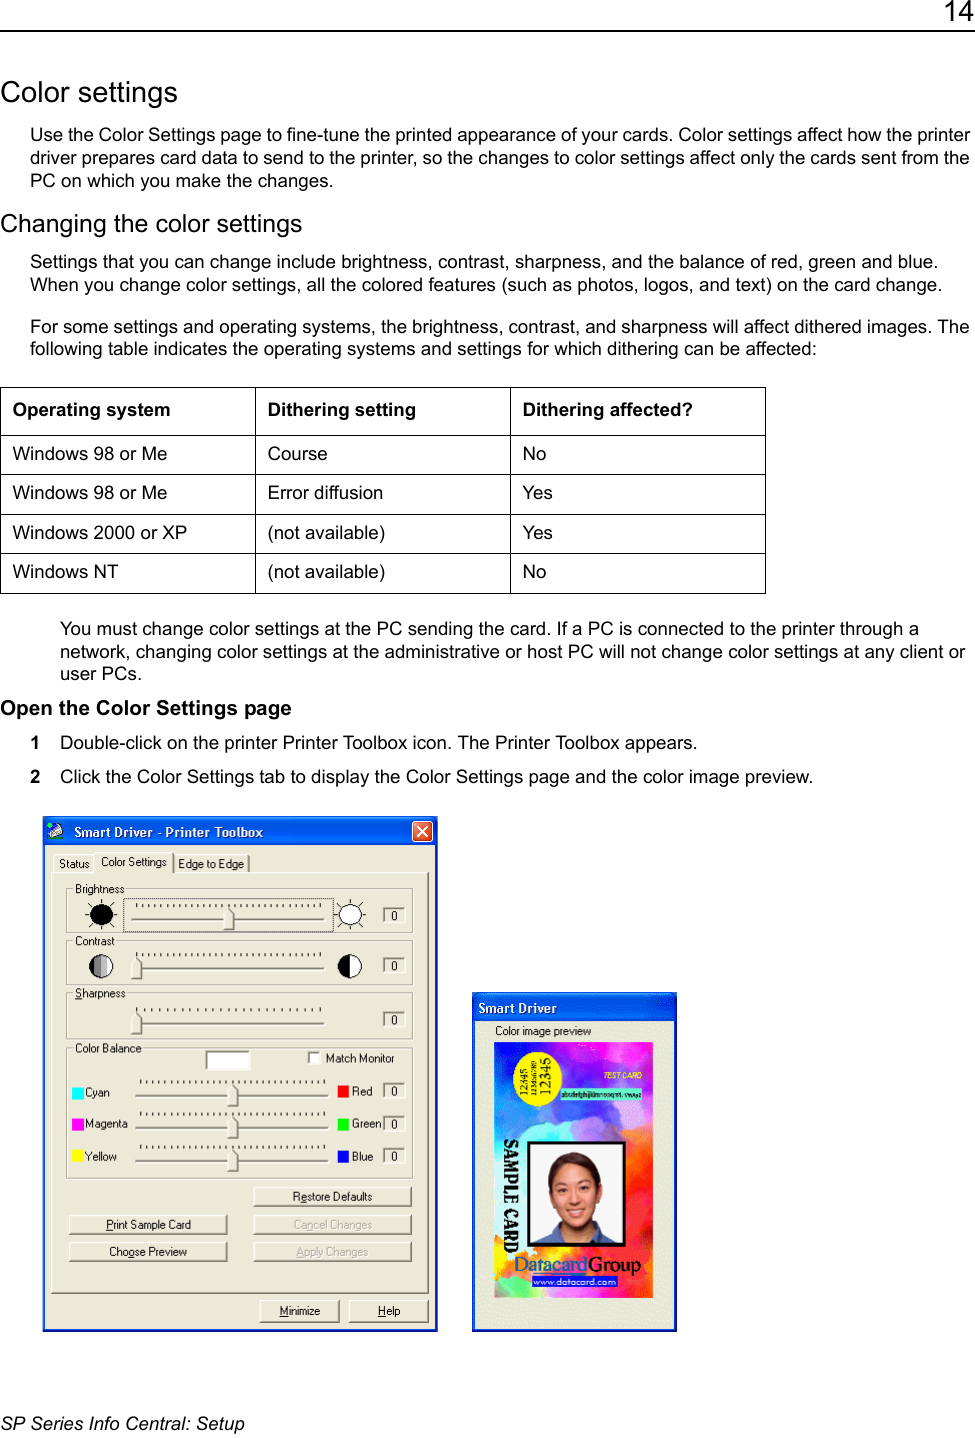 14SP Series Info Central: SetupColor settingsUse the Color Settings page to fine-tune the printed appearance of your cards. Color settings affect how the printer driver prepares card data to send to the printer, so the changes to color settings affect only the cards sent from the PC on which you make the changes.Changing the color settingsSettings that you can change include brightness, contrast, sharpness, and the balance of red, green and blue. When you change color settings, all the colored features (such as photos, logos, and text) on the card change.For some settings and operating systems, the brightness, contrast, and sharpness will affect dithered images. The following table indicates the operating systems and settings for which dithering can be affected:You must change color settings at the PC sending the card. If a PC is connected to the printer through a network, changing color settings at the administrative or host PC will not change color settings at any client or user PCs.Open the Color Settings page1Double-click on the printer Printer Toolbox icon. The Printer Toolbox appears.2Click the Color Settings tab to display the Color Settings page and the color image preview.  Operating system  Dithering setting Dithering affected?Windows 98 or Me Course NoWindows 98 or Me Error diffusion YesWindows 2000 or XP (not available) YesWindows NT (not available) No